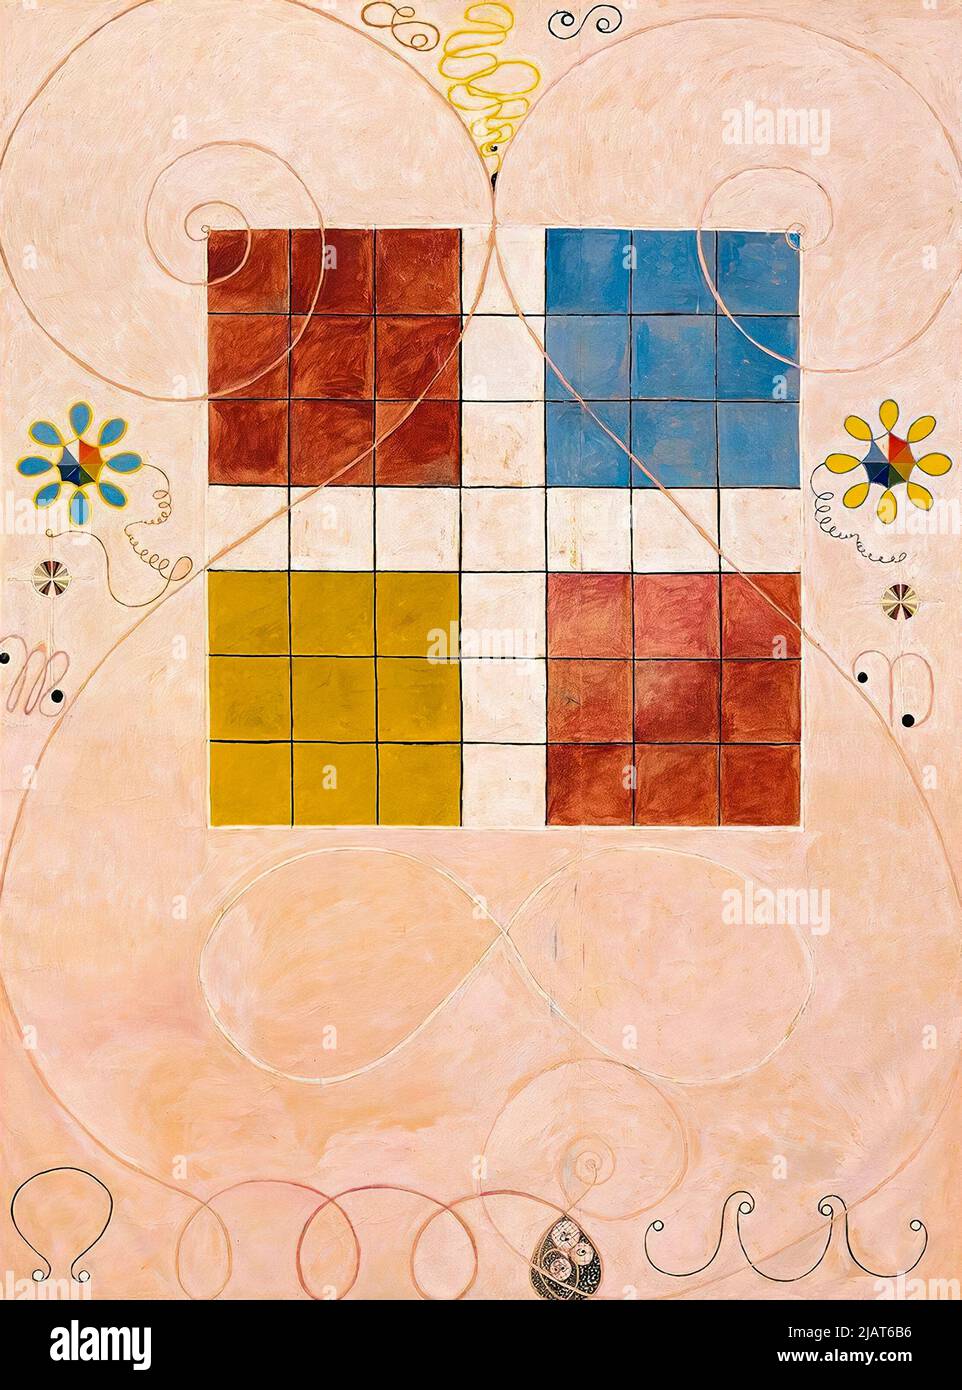 Hilma af Klint, The Ten Largest, No 10, Old Age, abstract painting in tempera on panel, 1907 Stock Photo